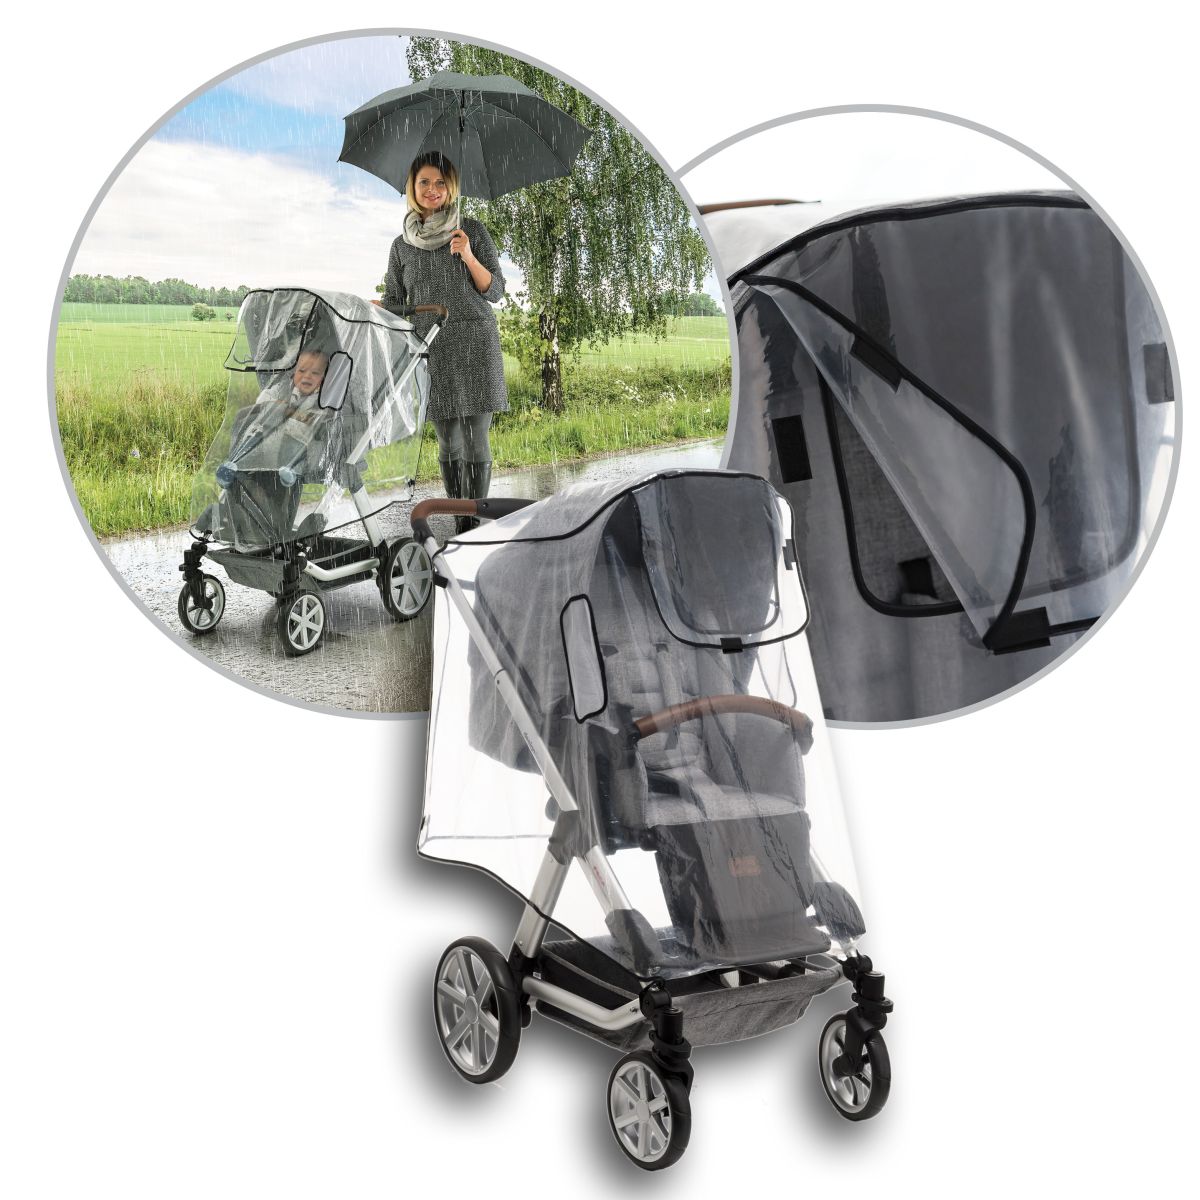 RainCover Active rain cover for buggies and sports pushchairs